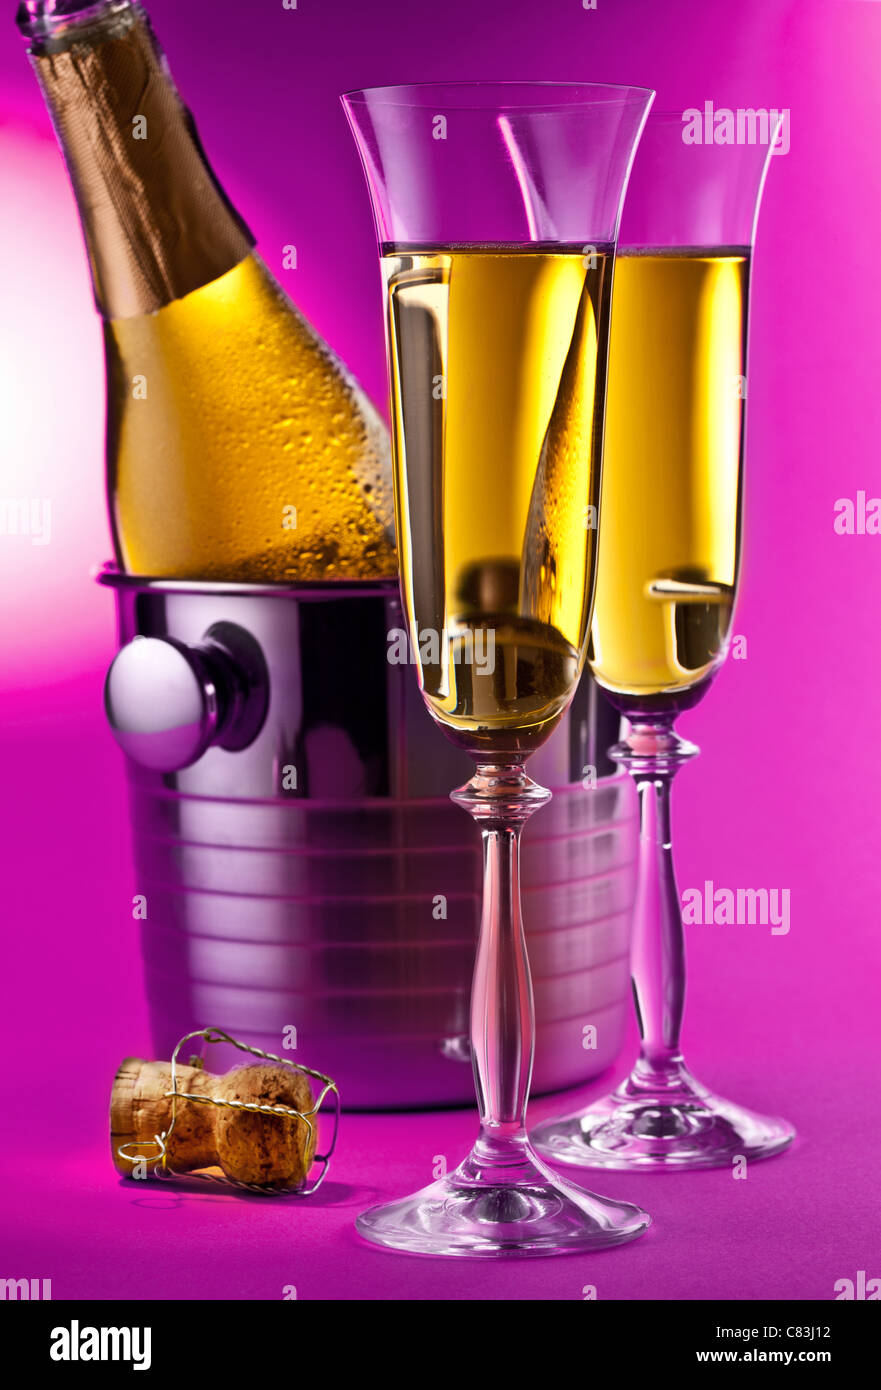 Champagne bottle in cooler and two champagne glasses. Isolated on a pink background. Stock Photo